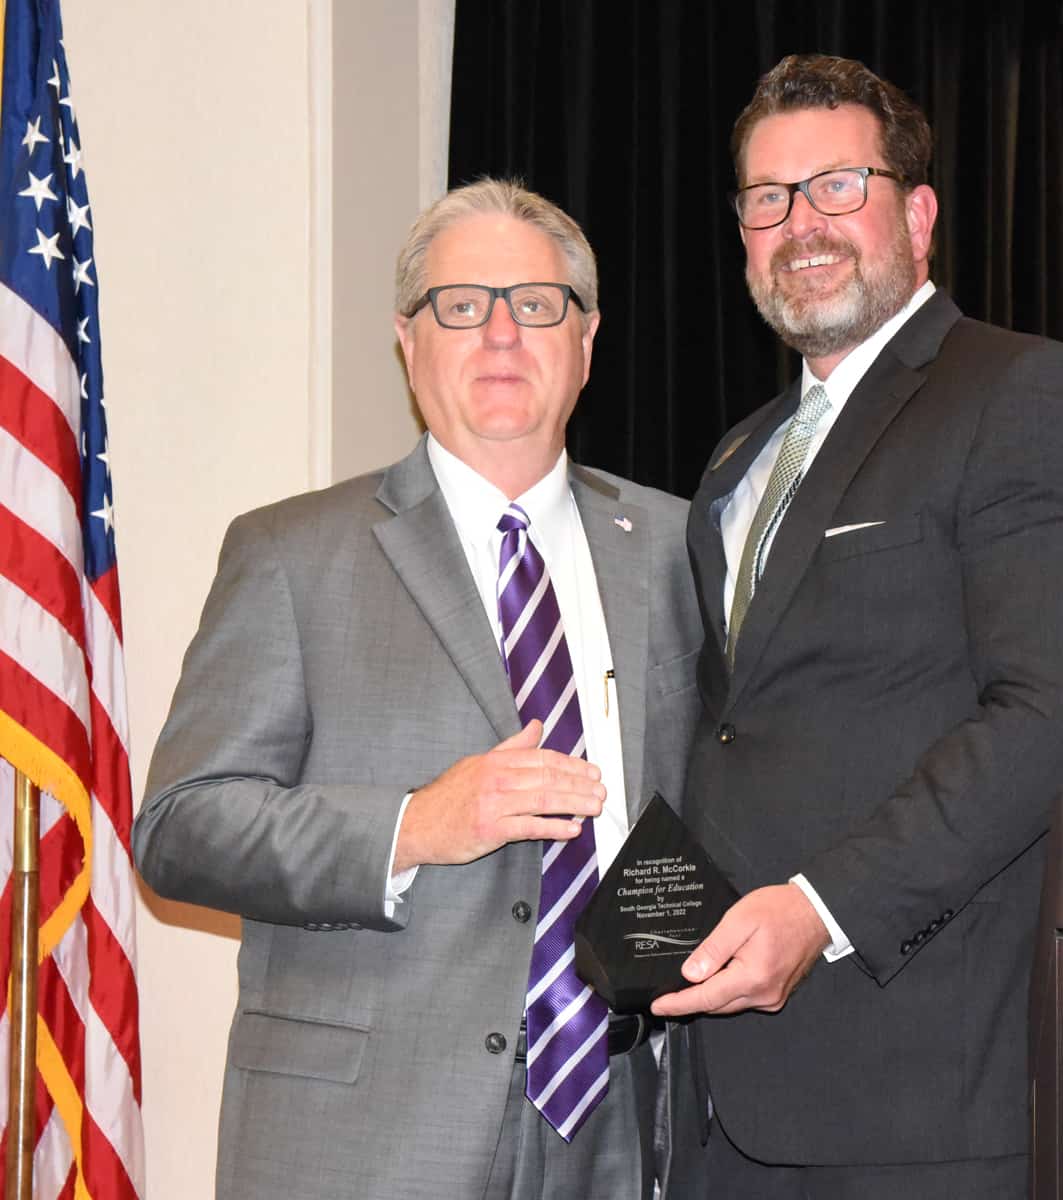 South Georgia Technical College President Dr. John Watford (right) is shown above presenting SGTC’s Champion of Education trophy to RESA’s Richard McCorkle (left).